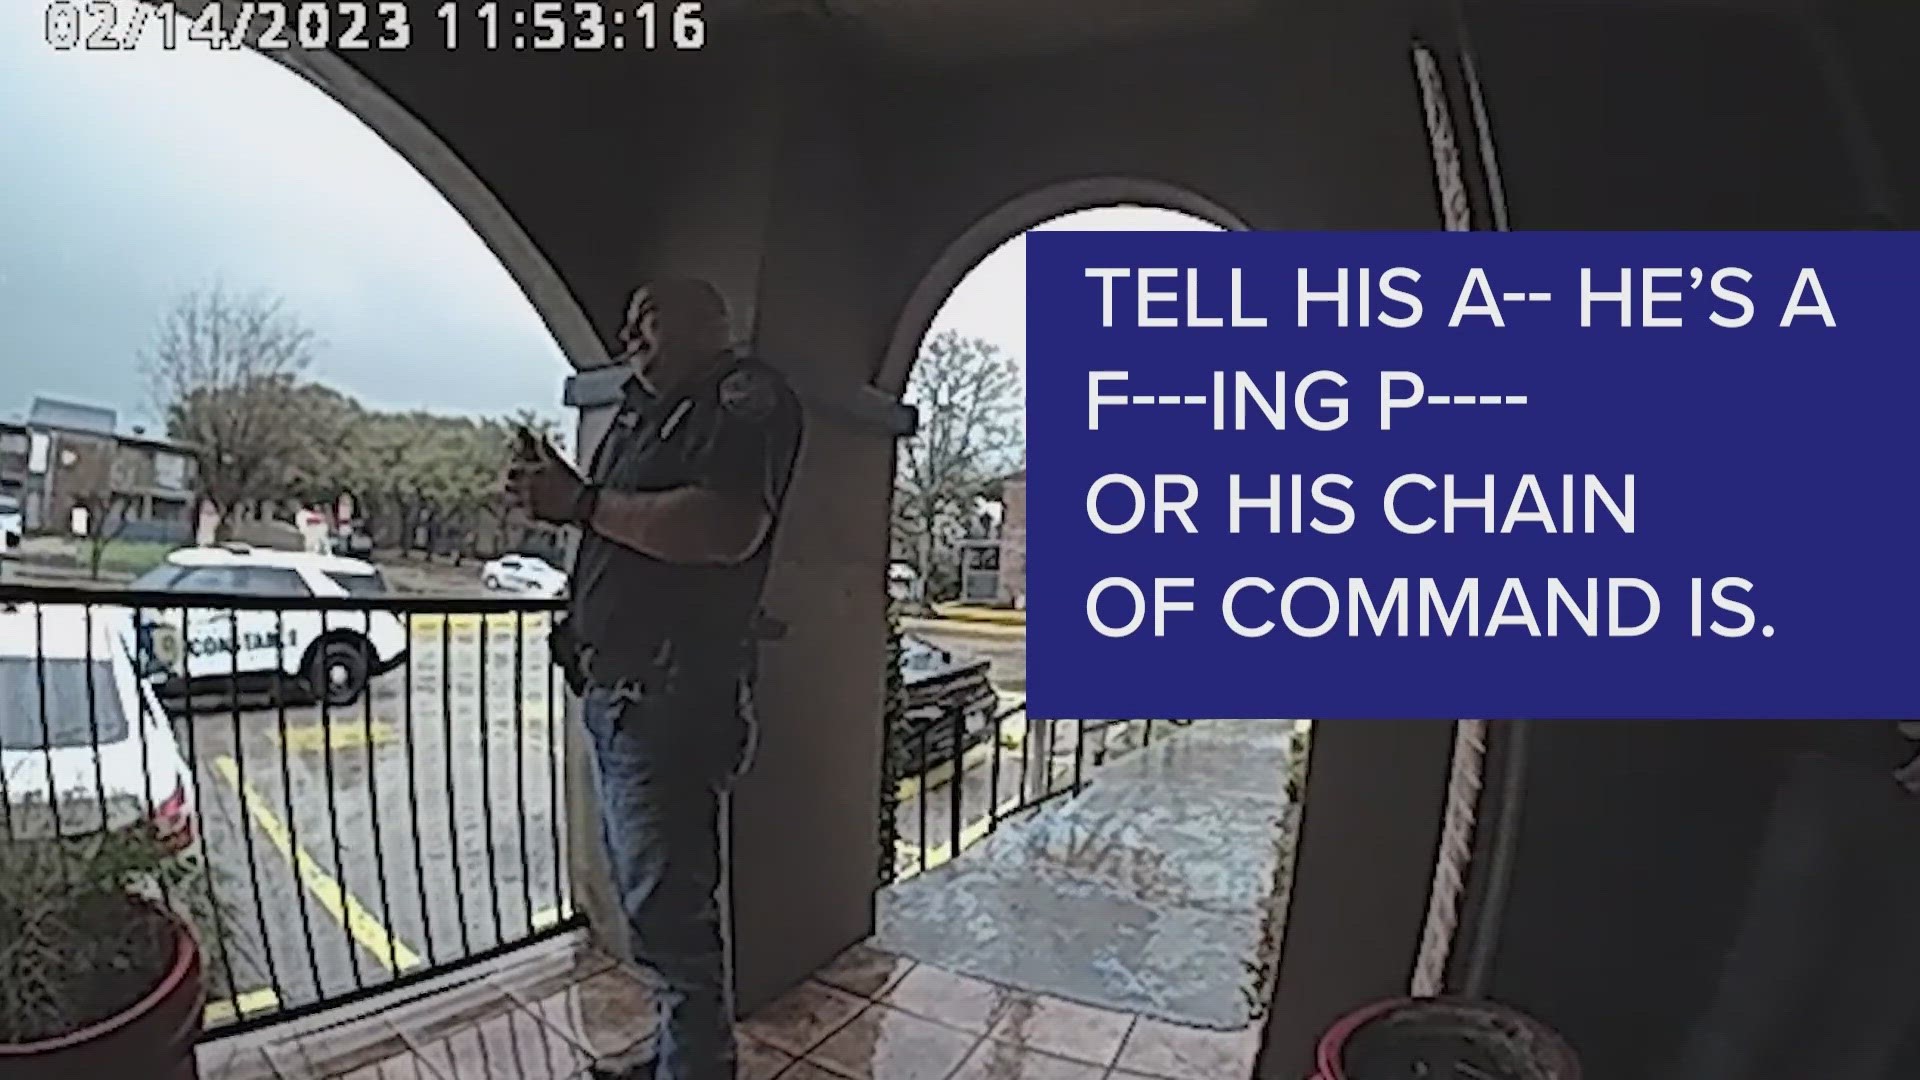 The police chief of Coffee City, Texas launched a profanity-filled rant against a Harris County constable while working an off-duty security job in Houston.